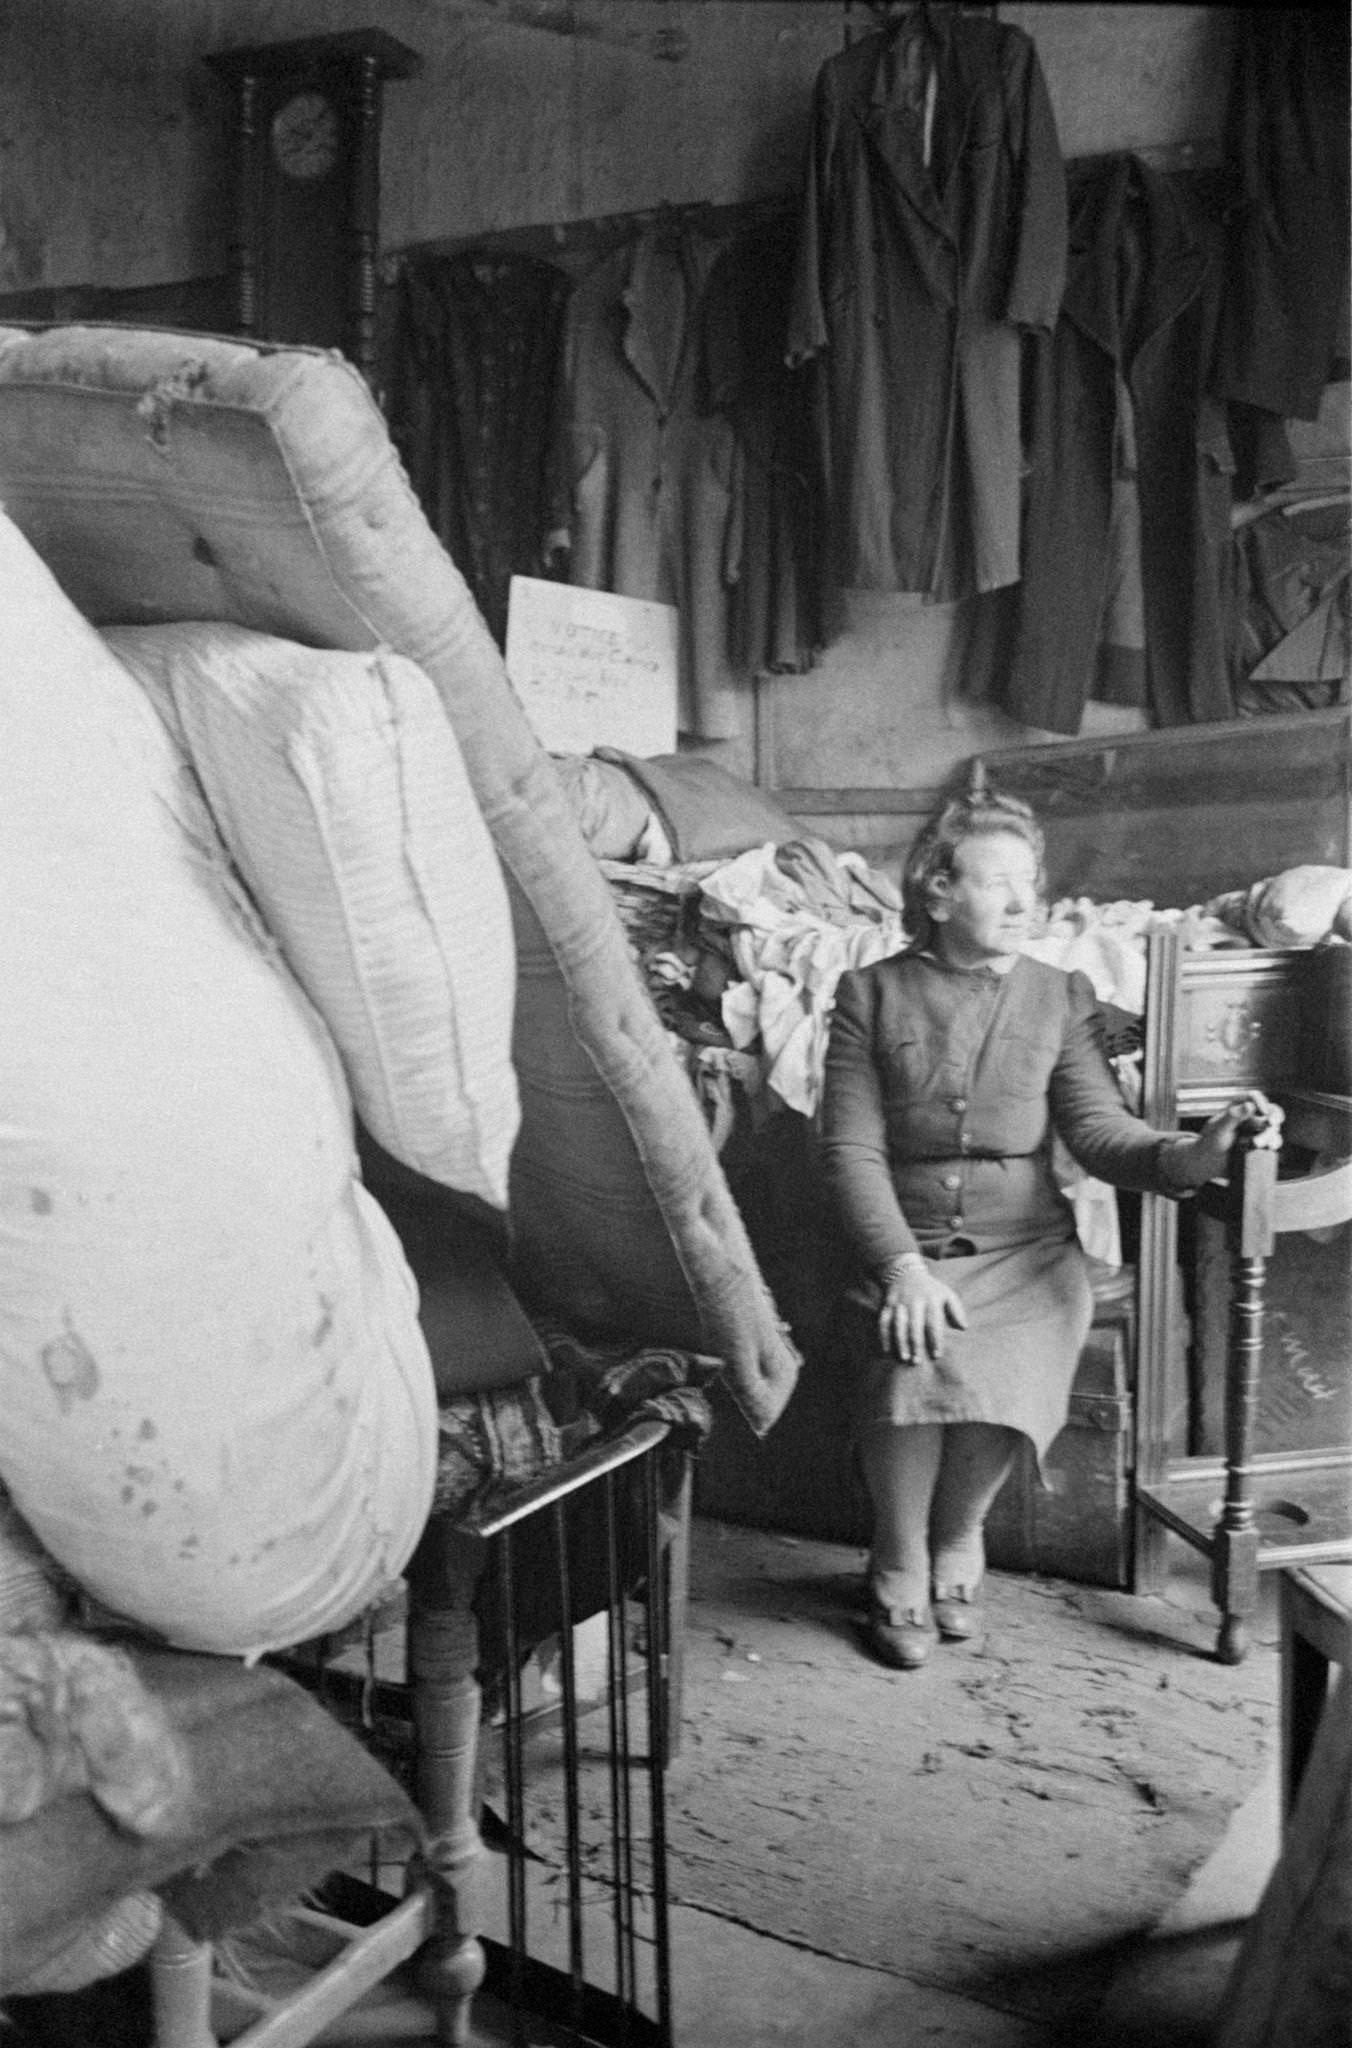 Mrs Lundy at her junk shop in Bedford Street in the Gorbals, a slum district of Glasgow, 1948.